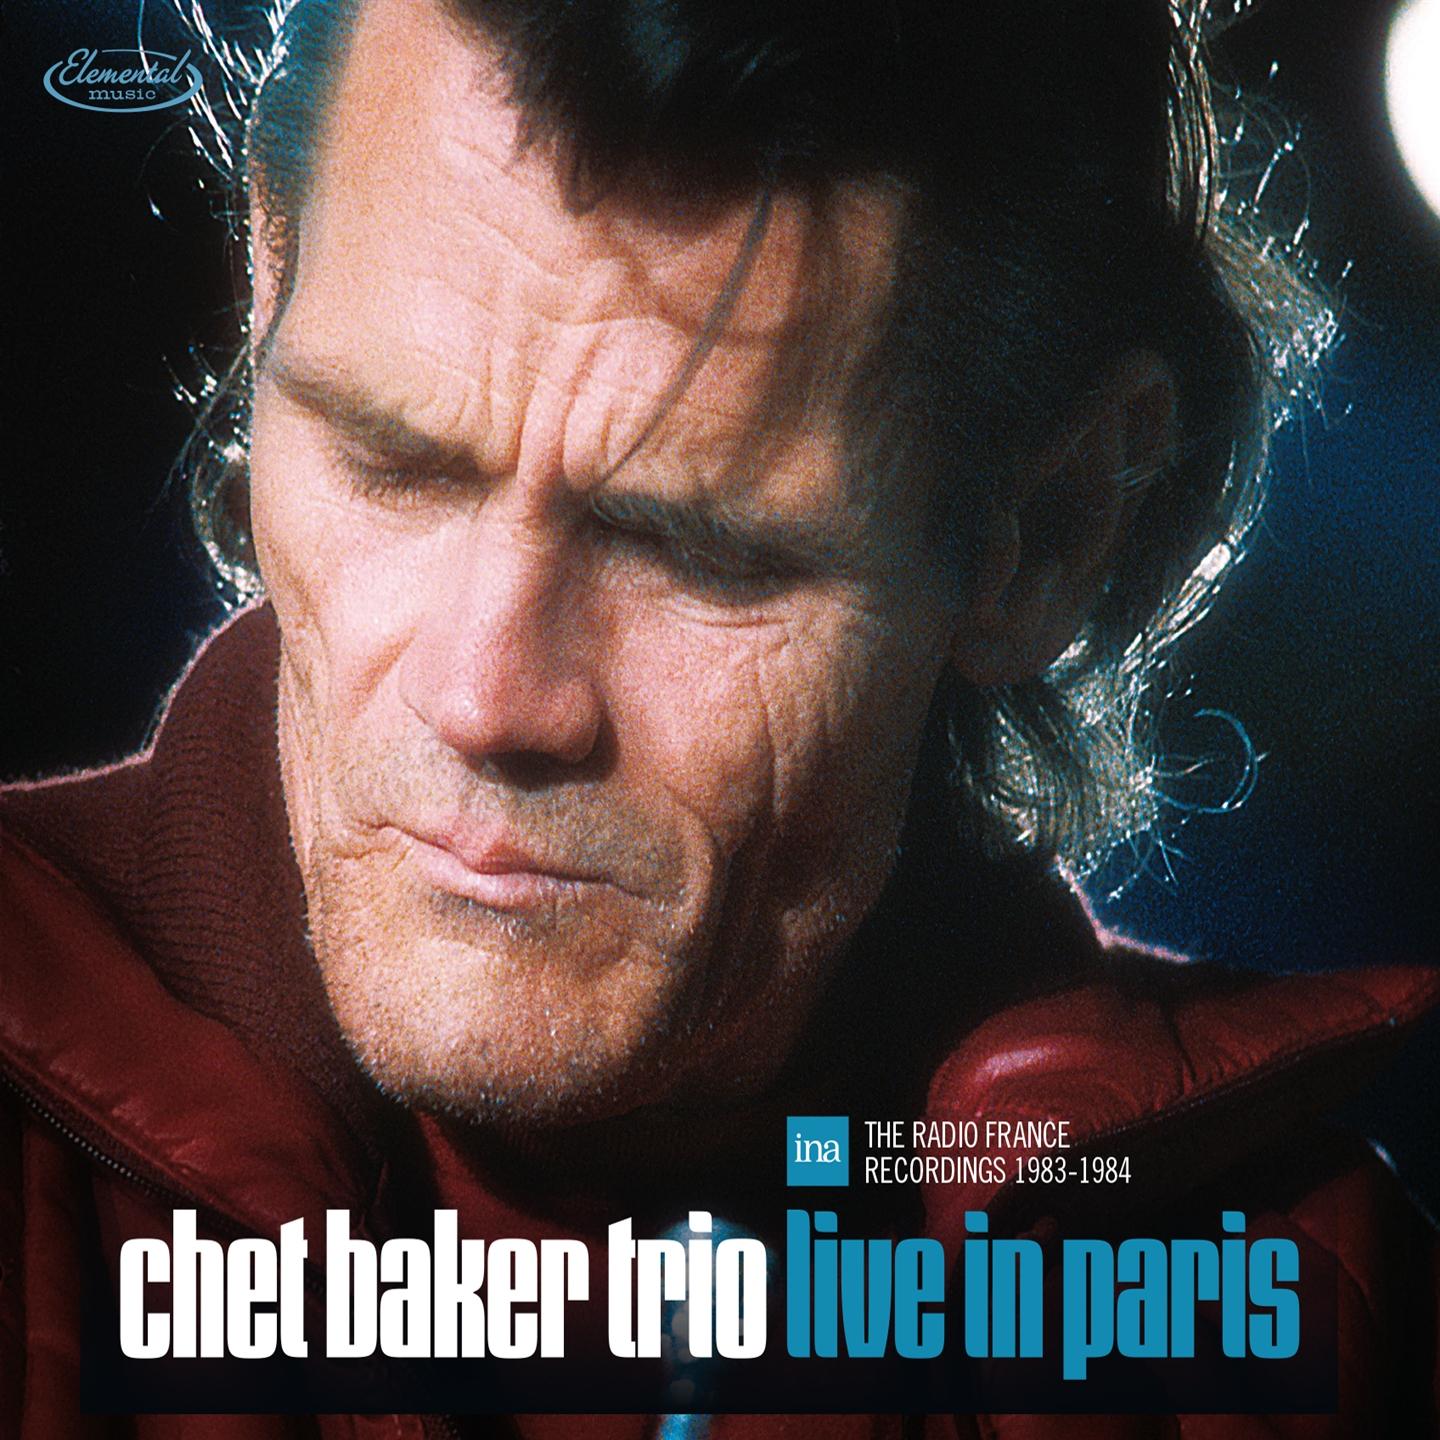 LIVE IN PARIS - THE RADIO FRANCE RECORDINGS 1983-84 [DELUXE 2CD]